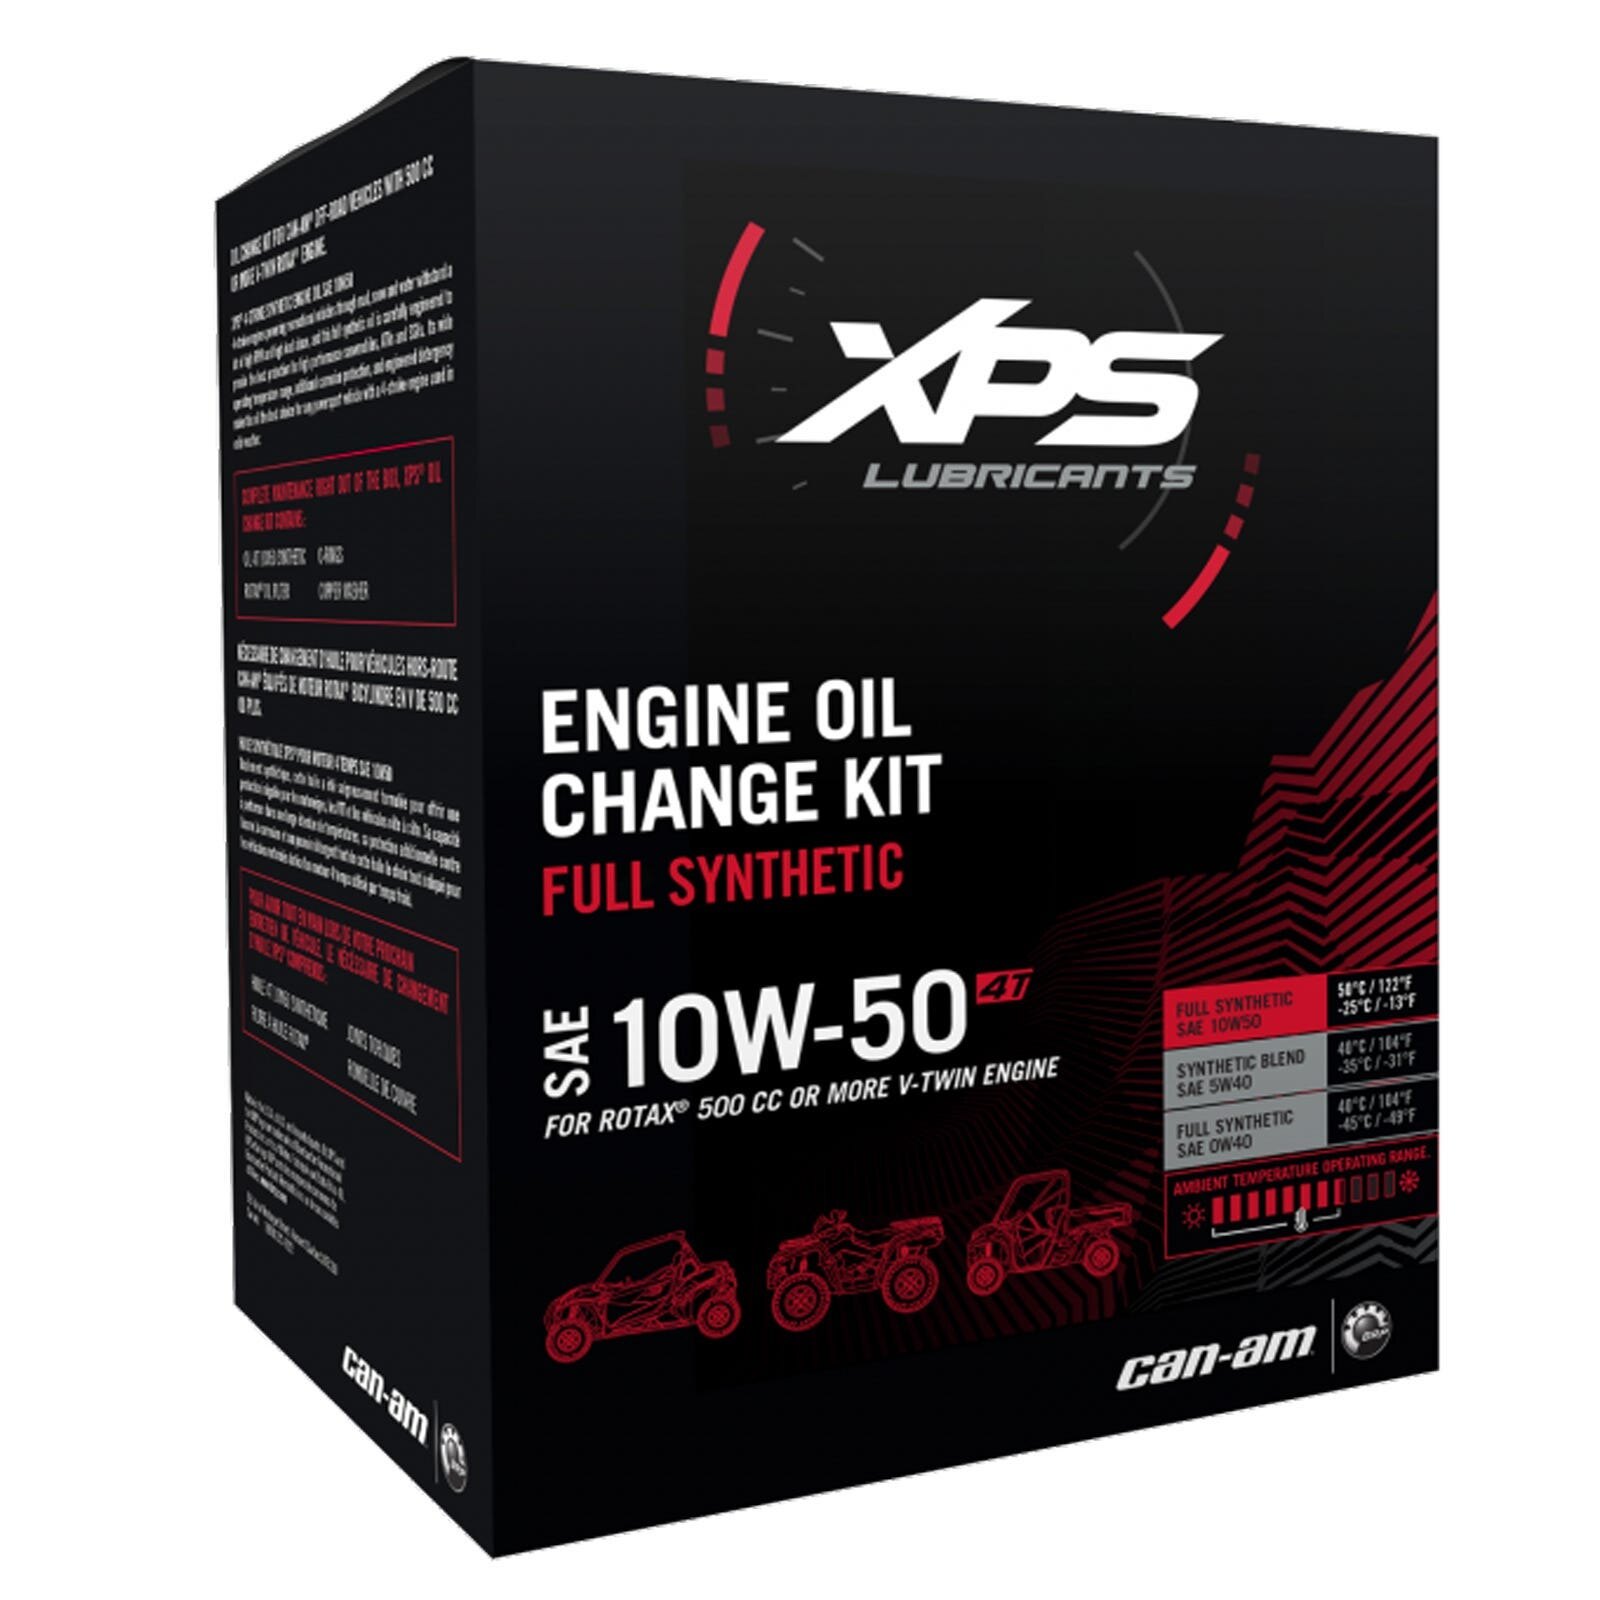 4T 10W 50 Synthetic Oil Change Kit for Rotax 500 cc or more V Twin engine